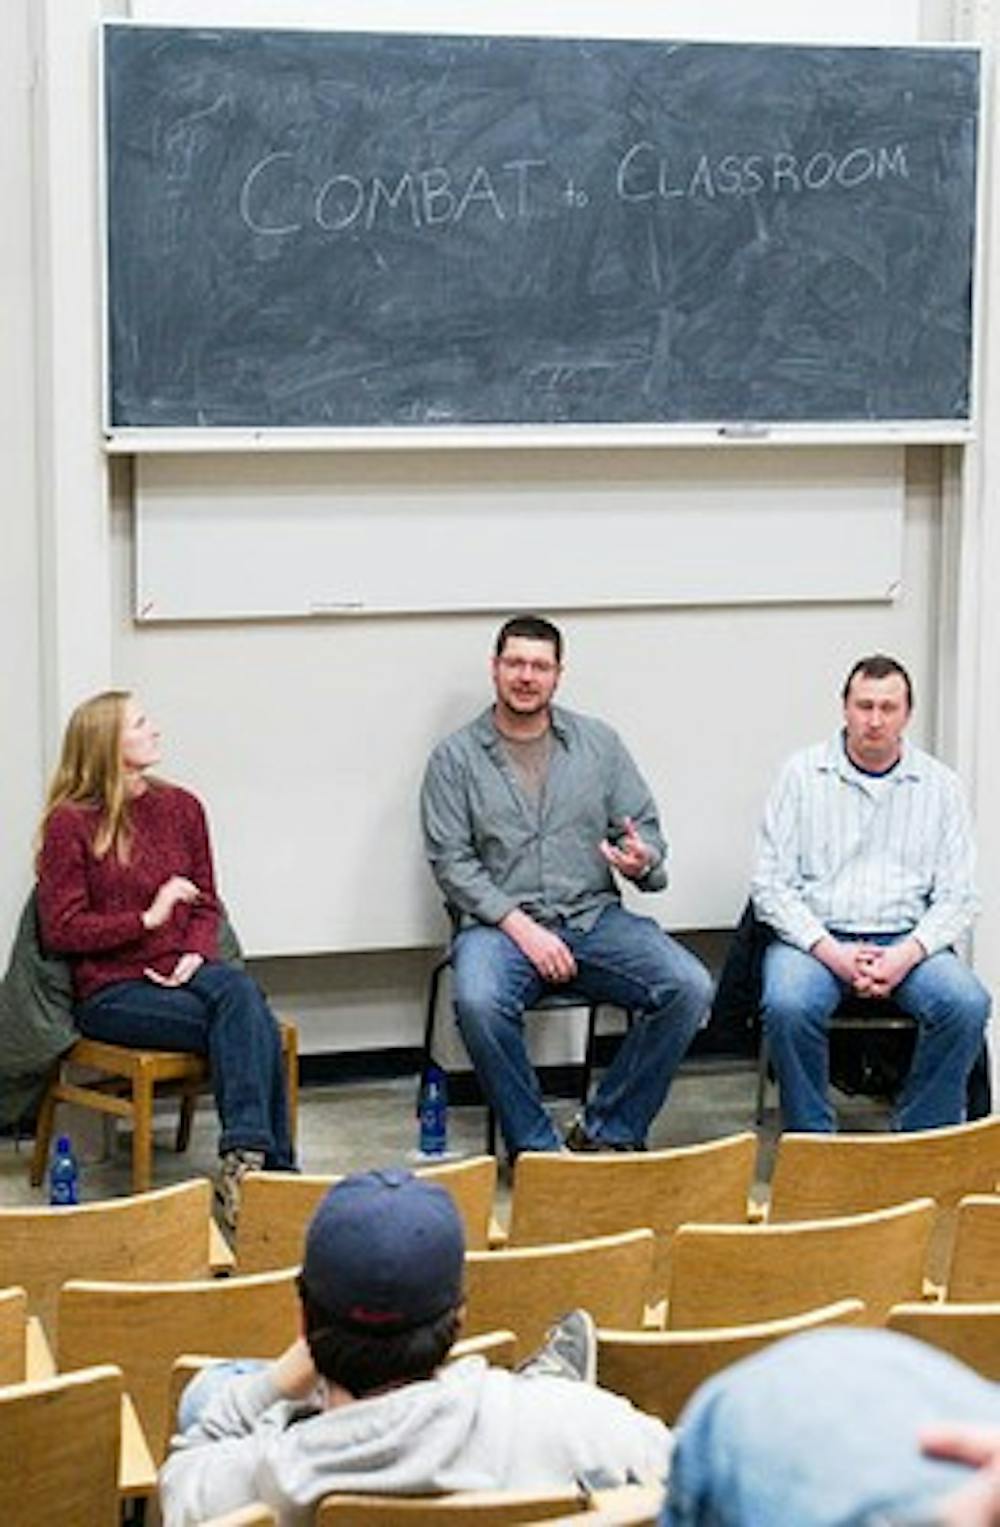 Student veterans share experiences after returning from service